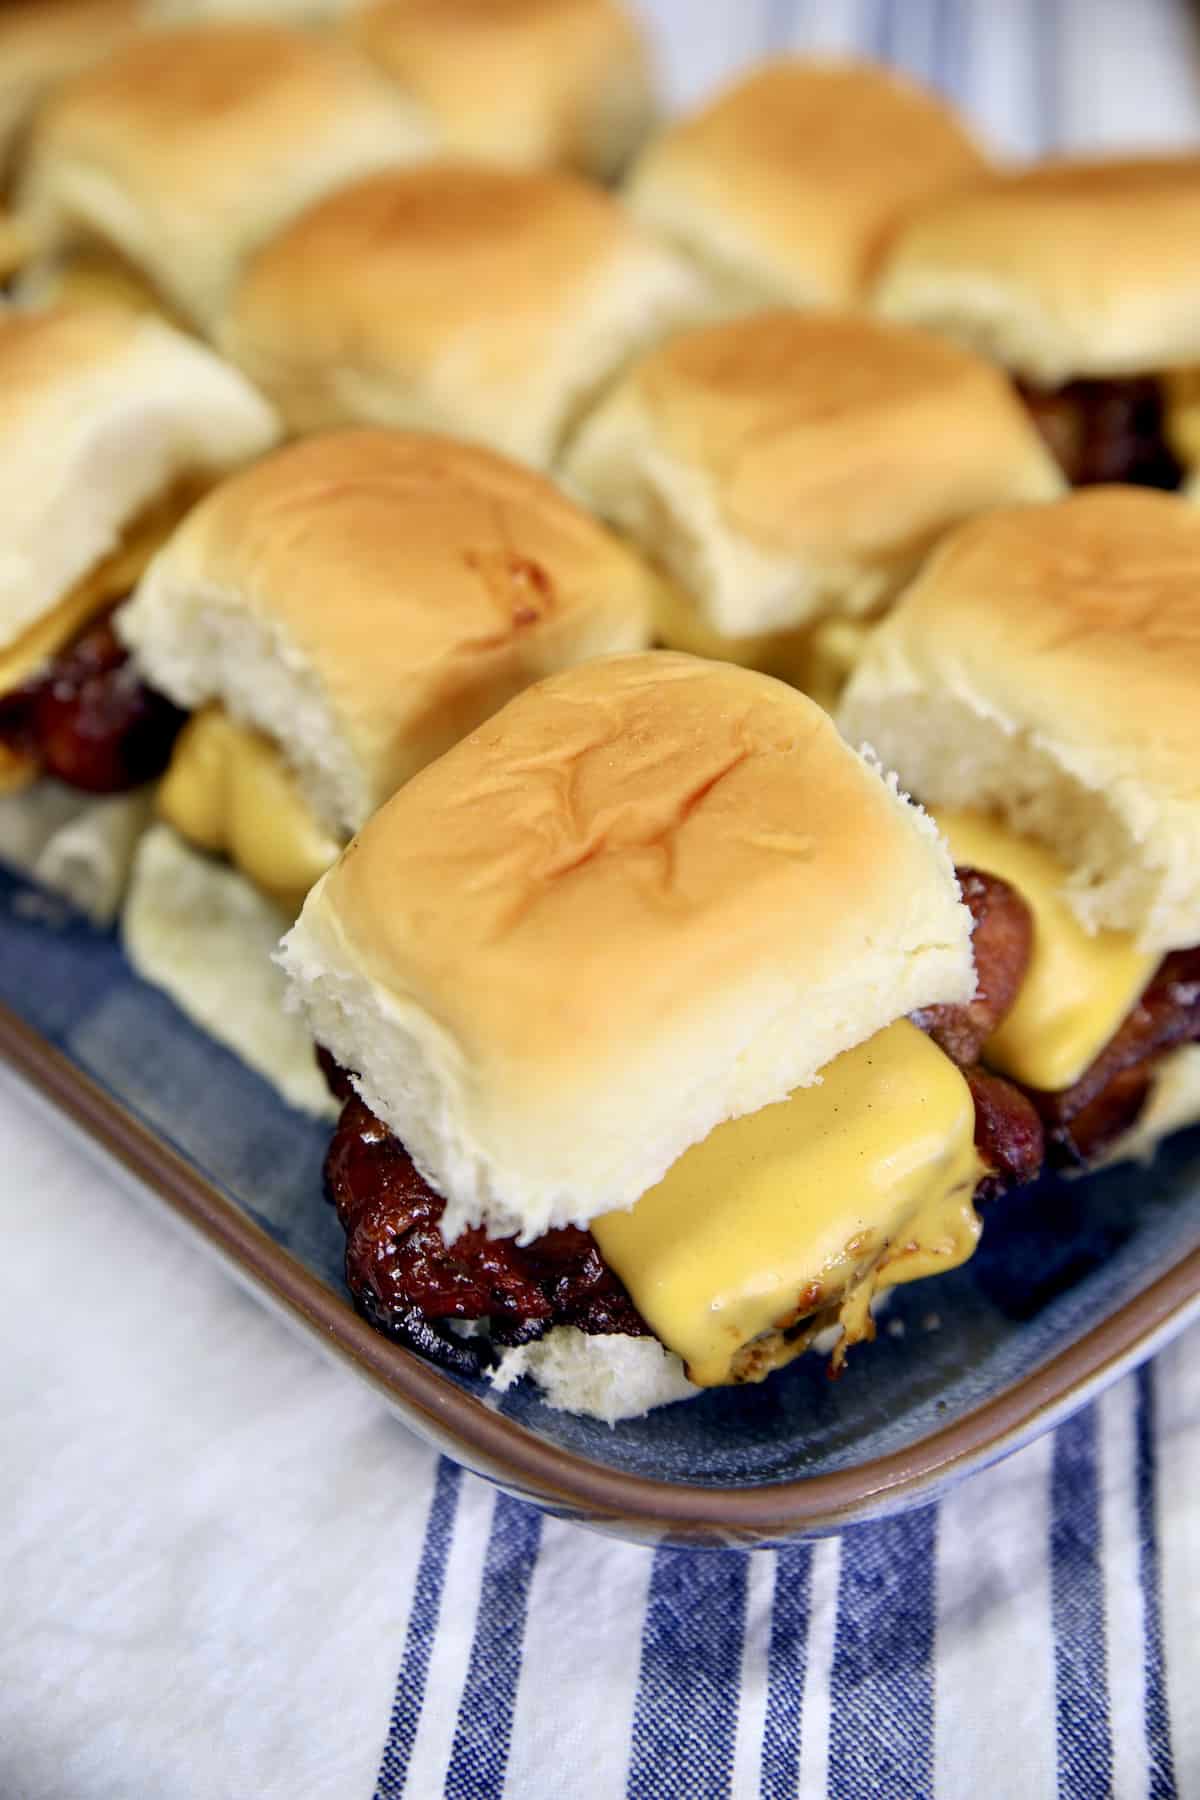 Slider burgers on a tray.